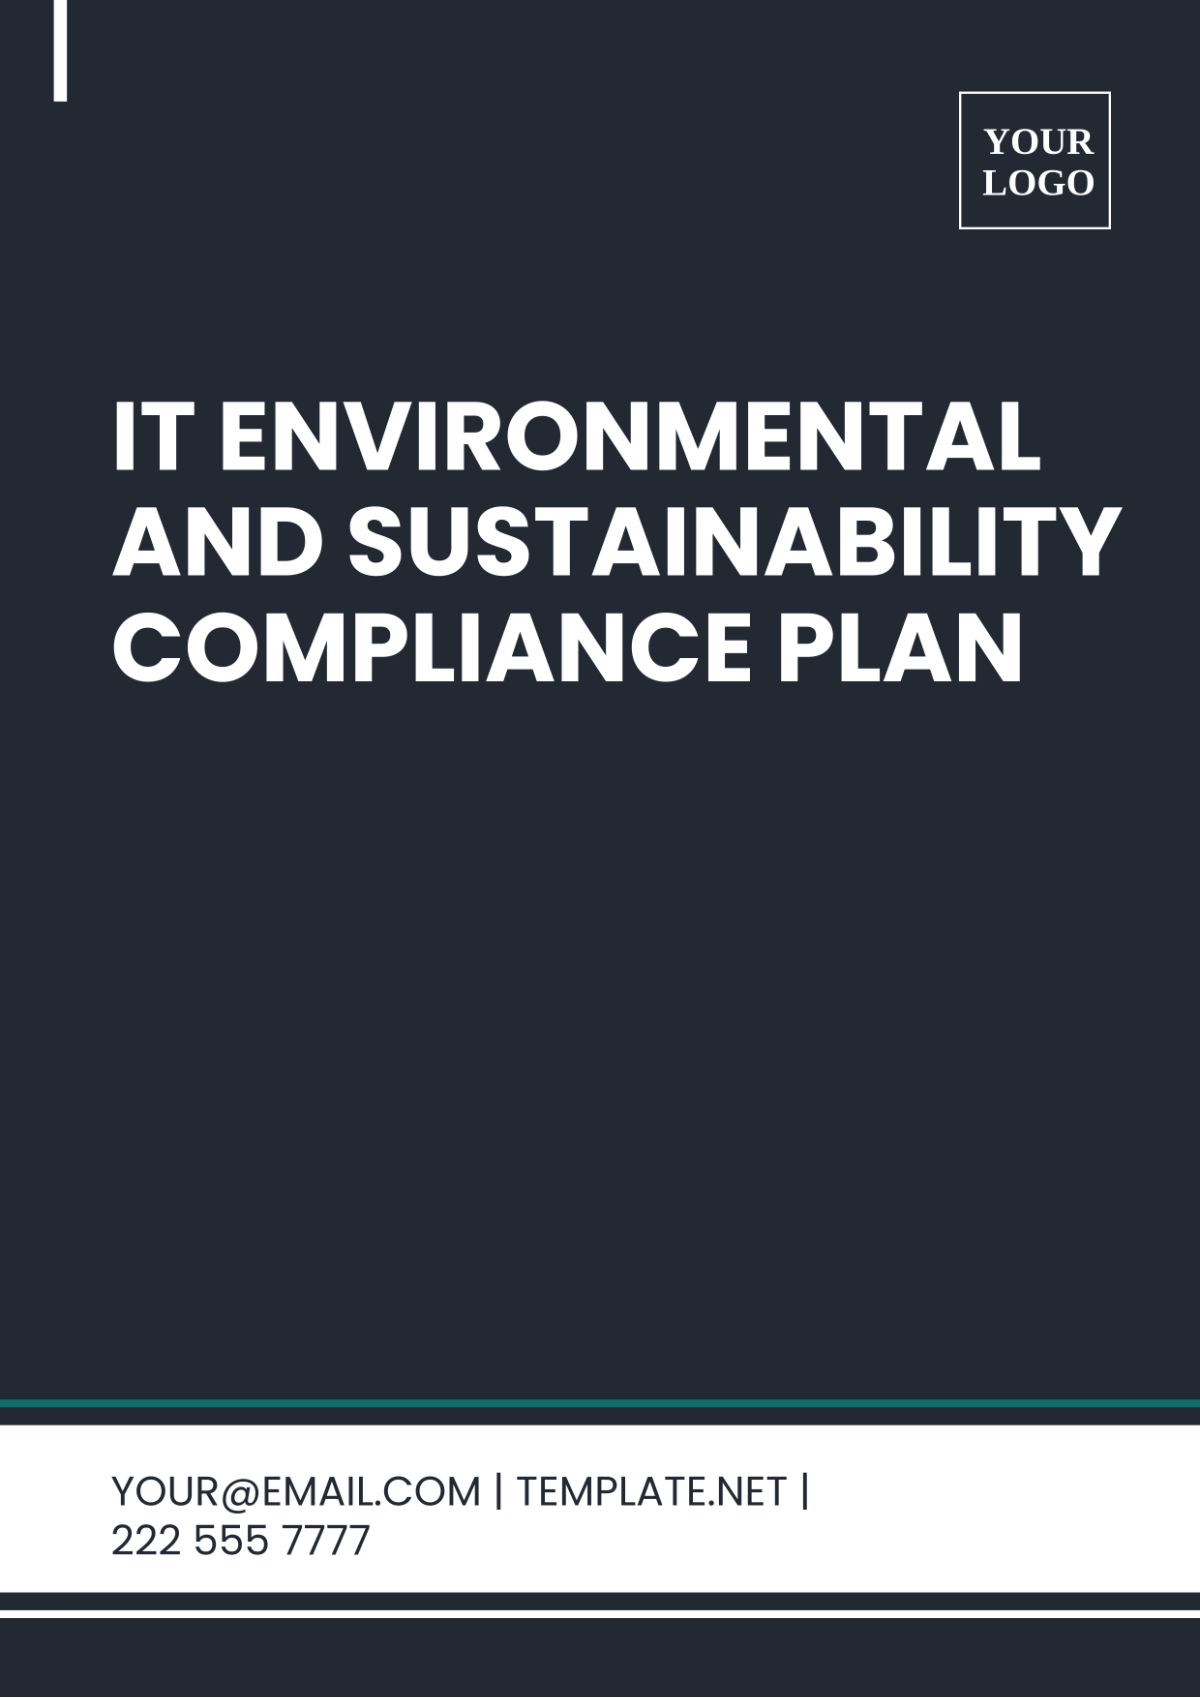 Free IT Environmental And Sustainability Compliance Plan Template